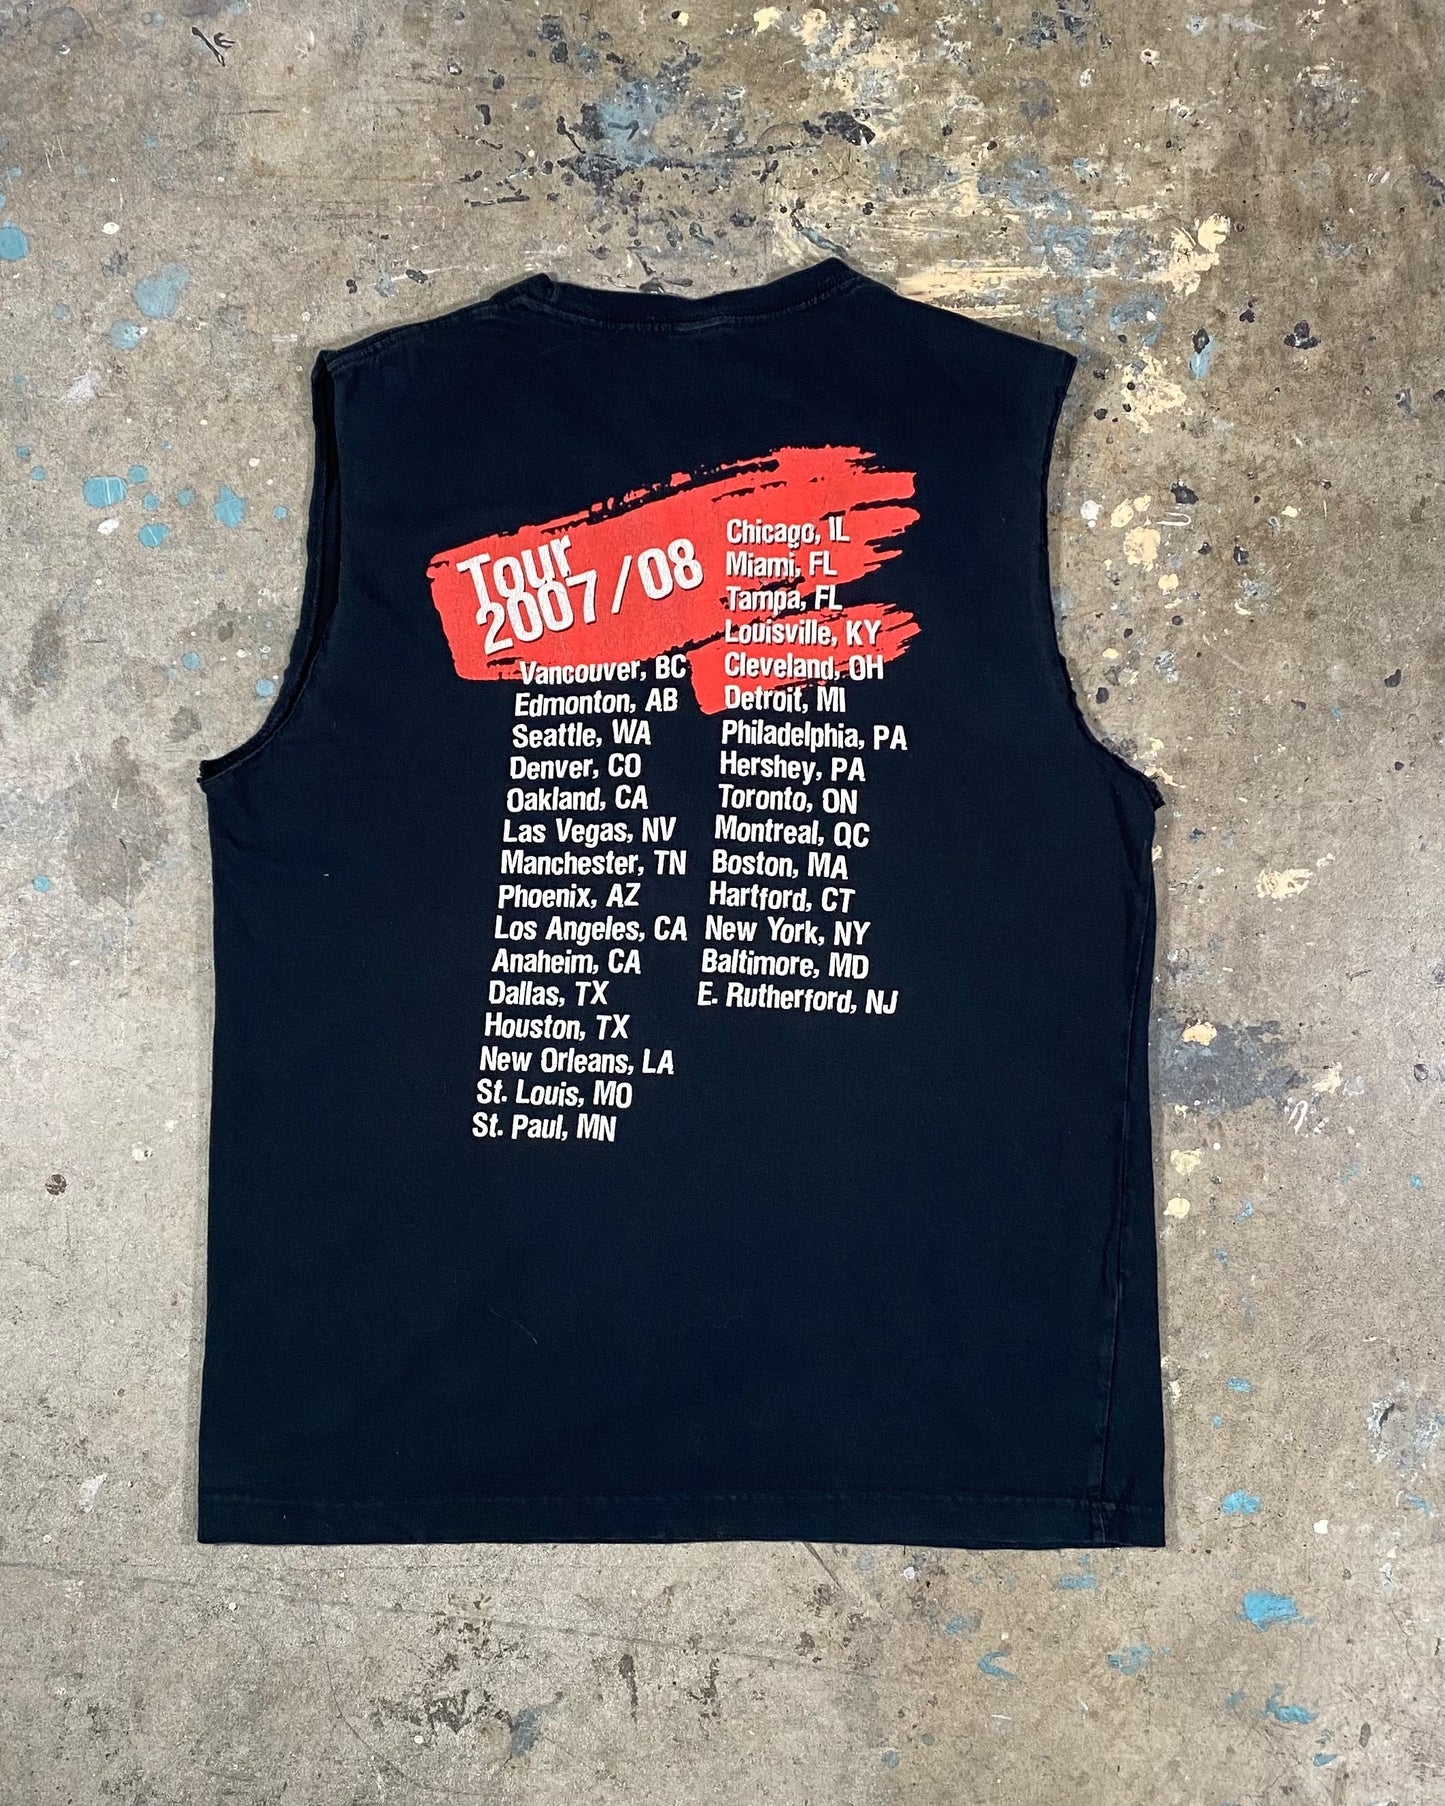 The Police Concert Tank (M)